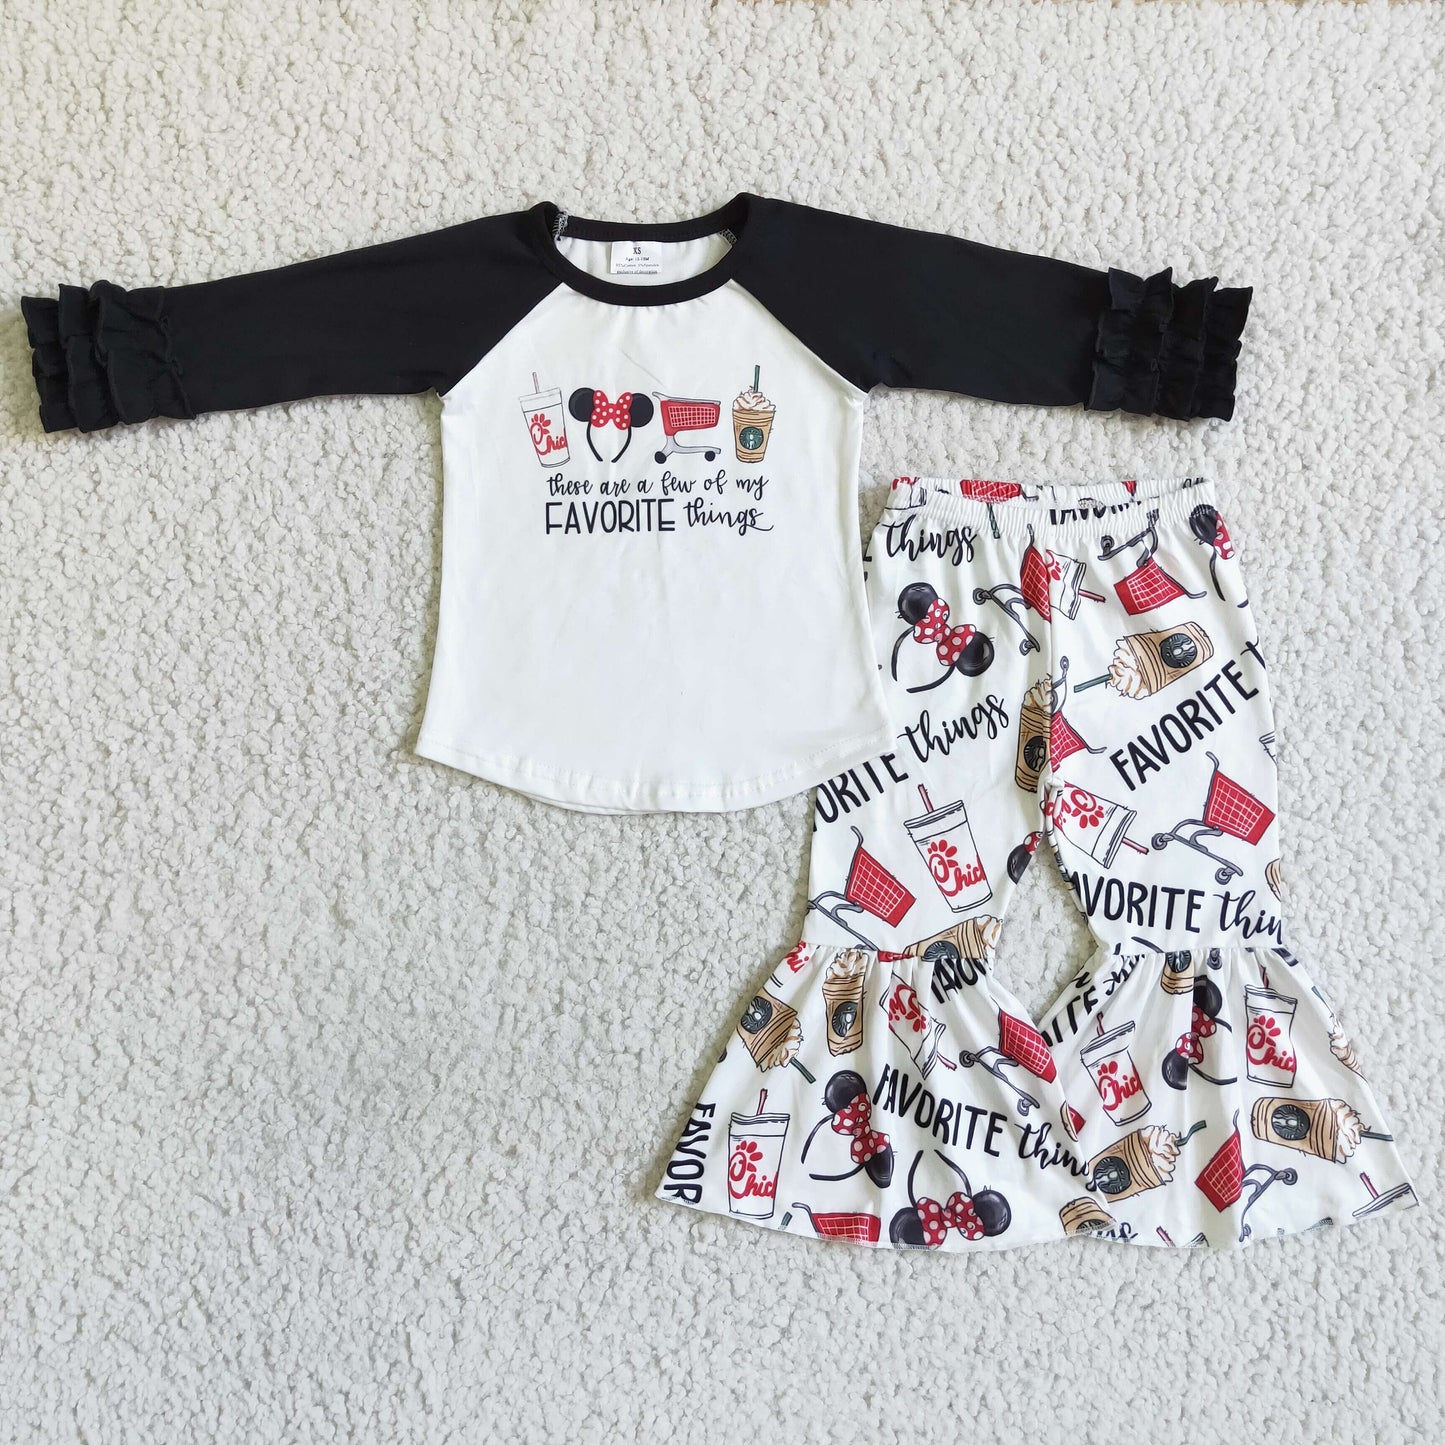 These are a few of my favorite things snacks little girls clothing